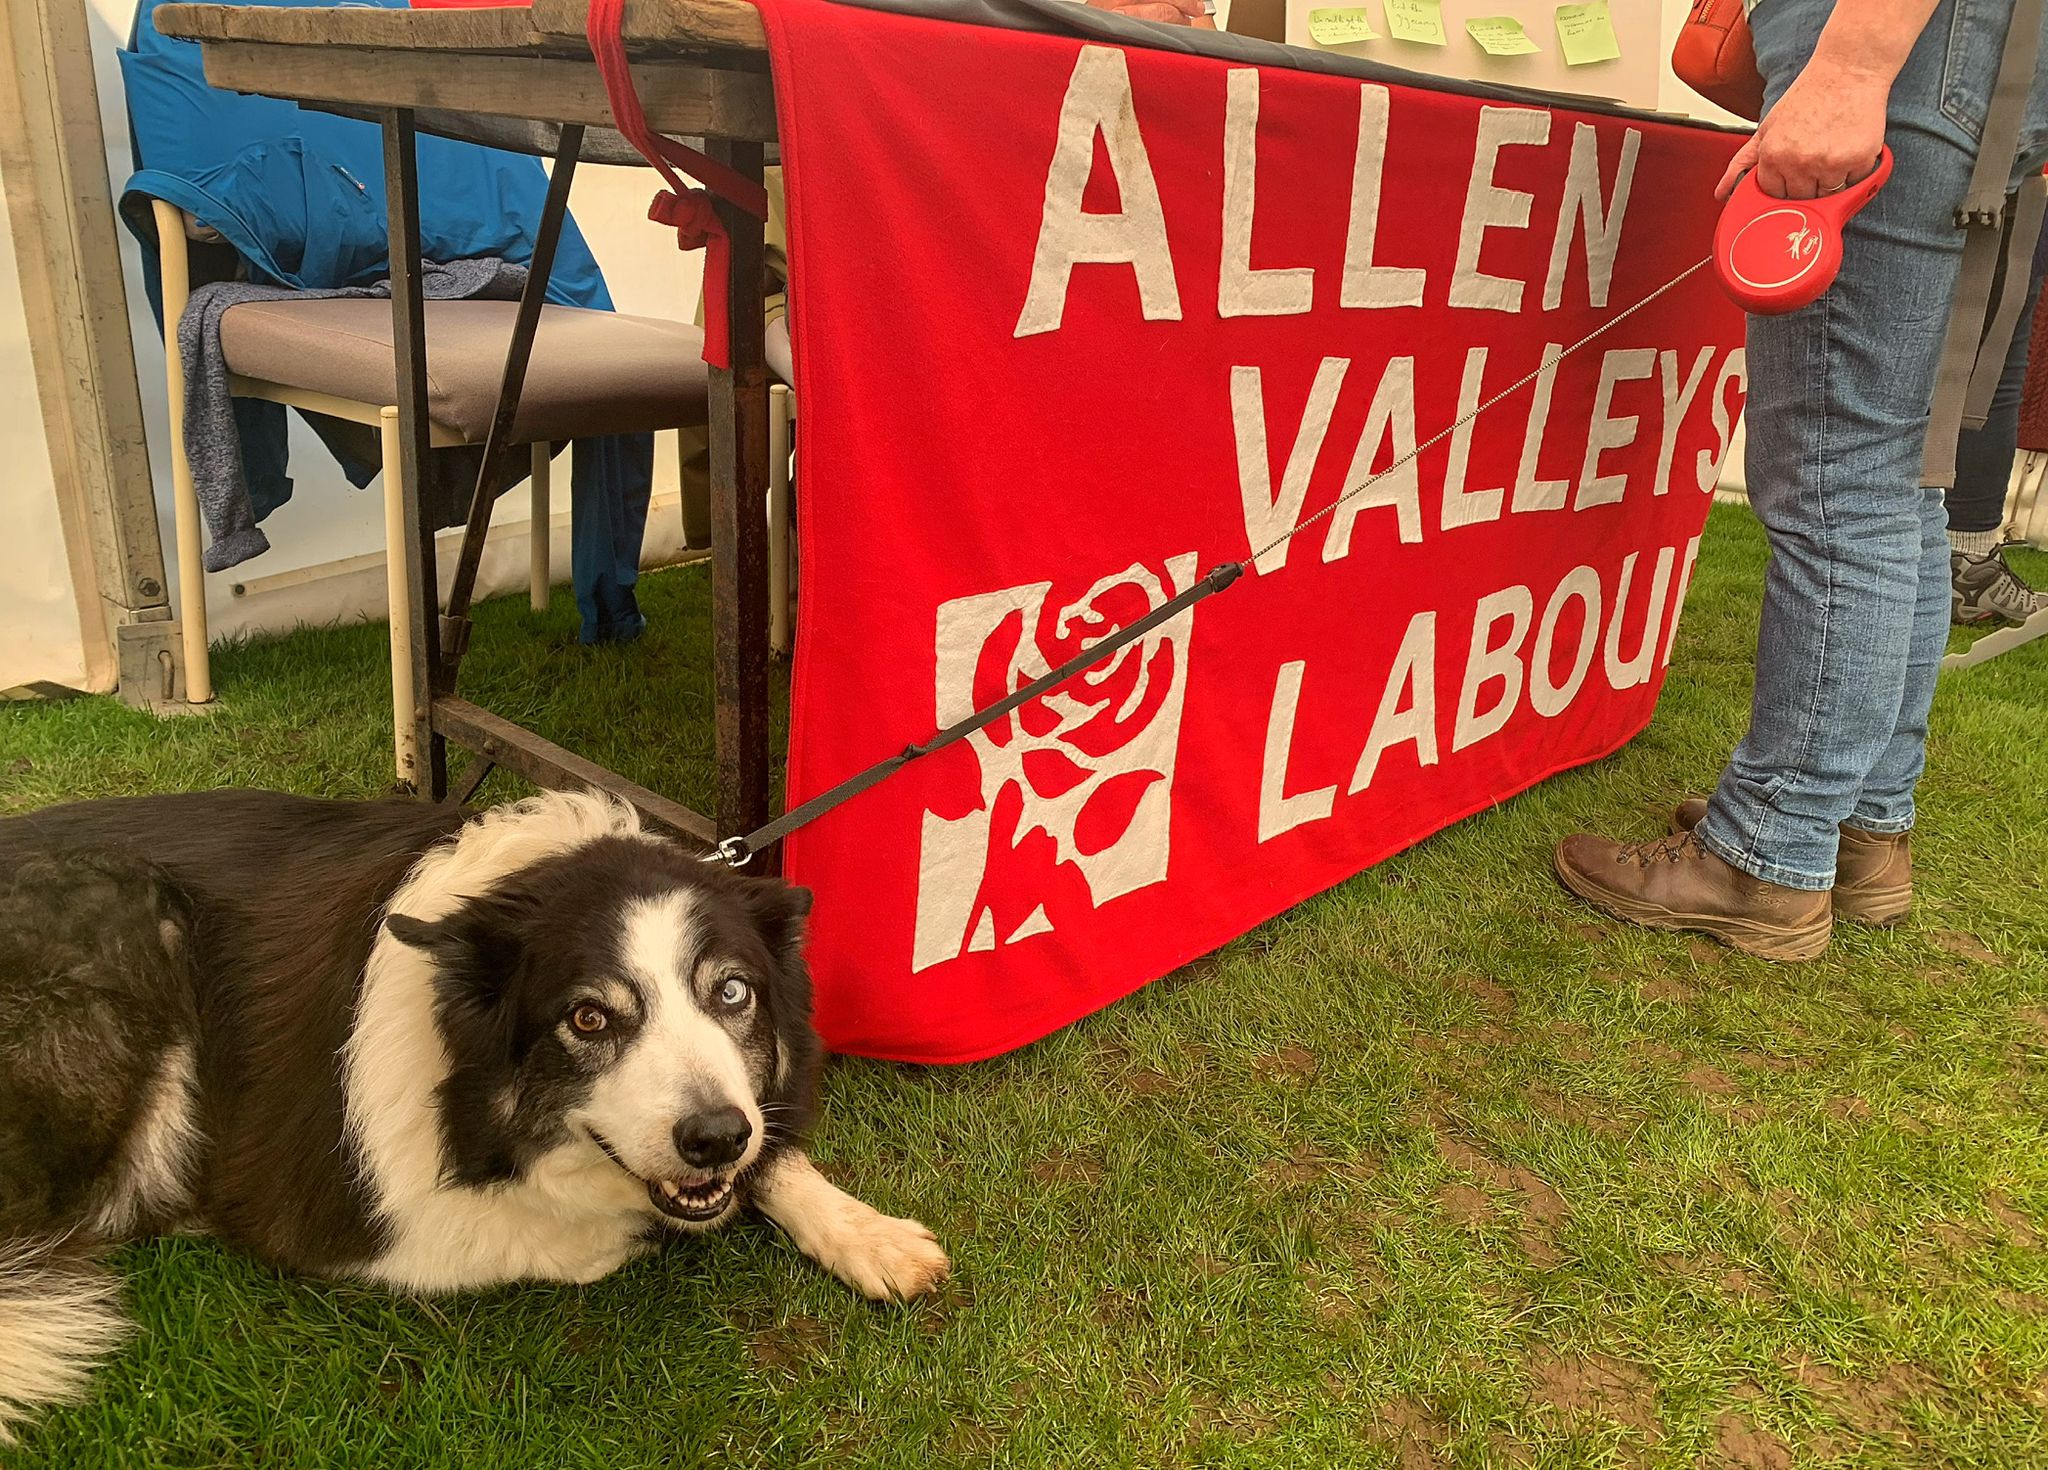 Labour at the Allendale Agricultural Show